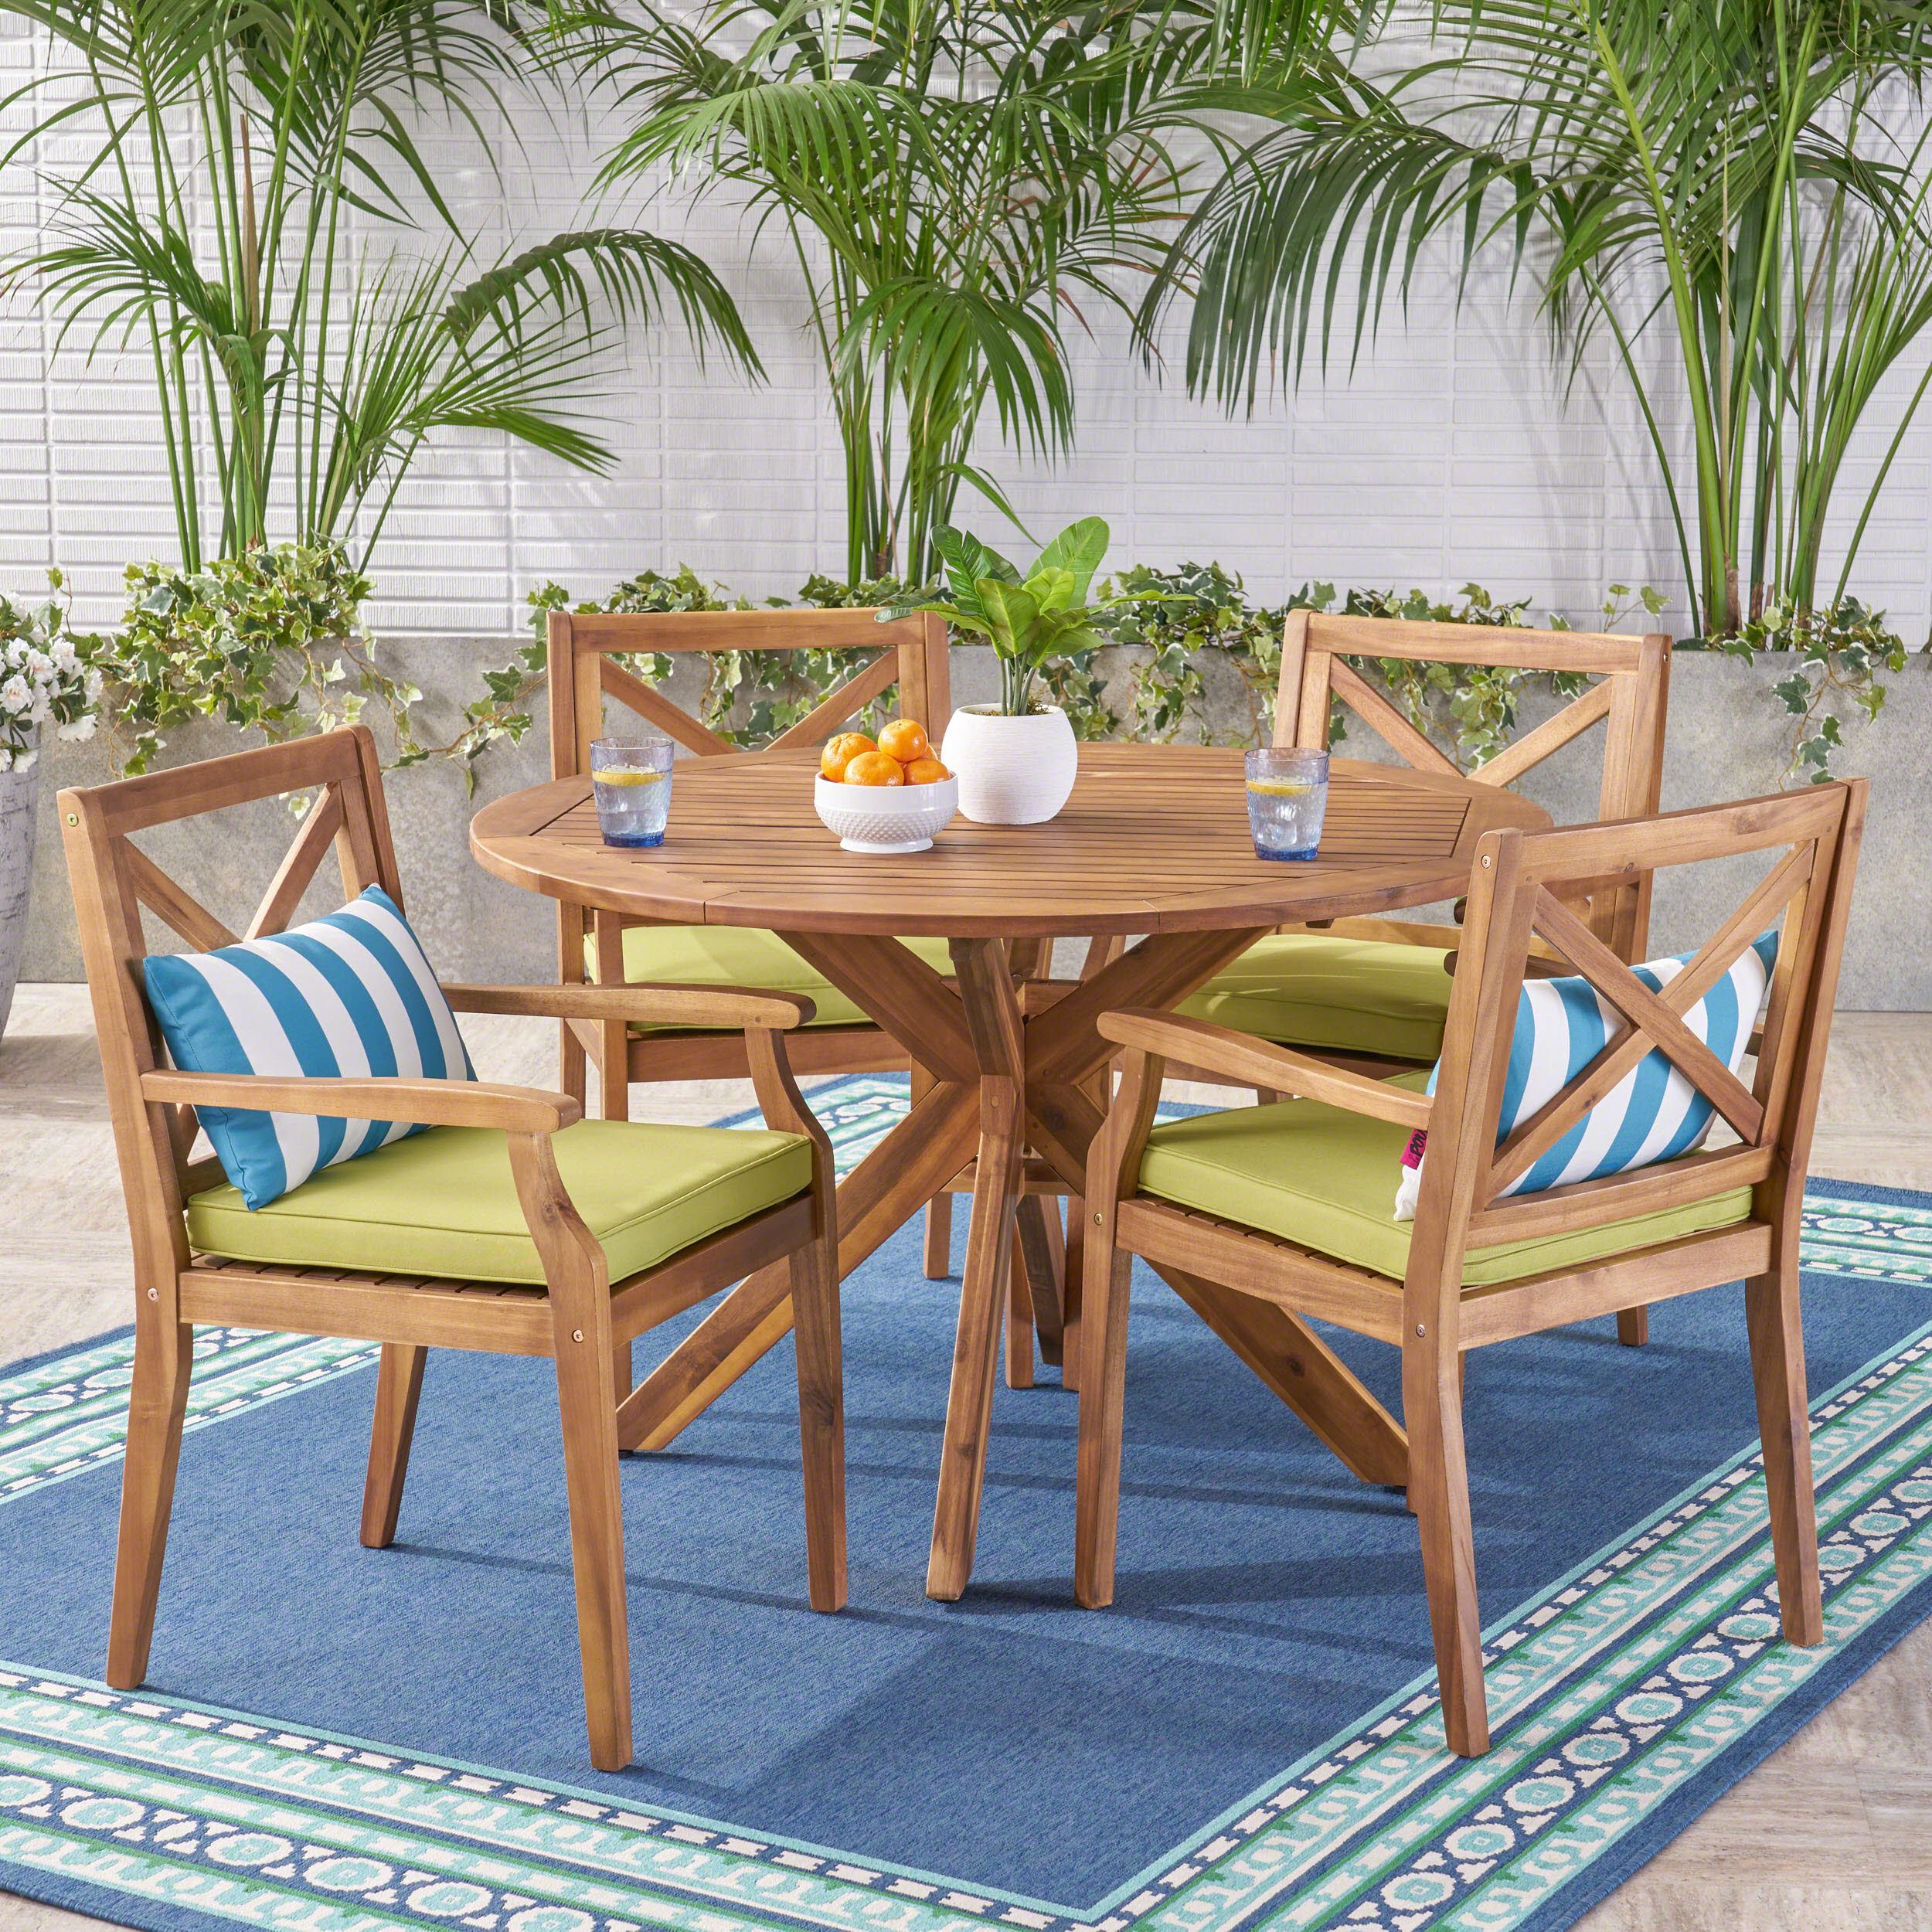 Oakley Outdoor 5 Piece Acacia Wood Round Dining Set With Cushions, Teak Intended For Round 5 Piece Outdoor Dining Set (View 2 of 15)